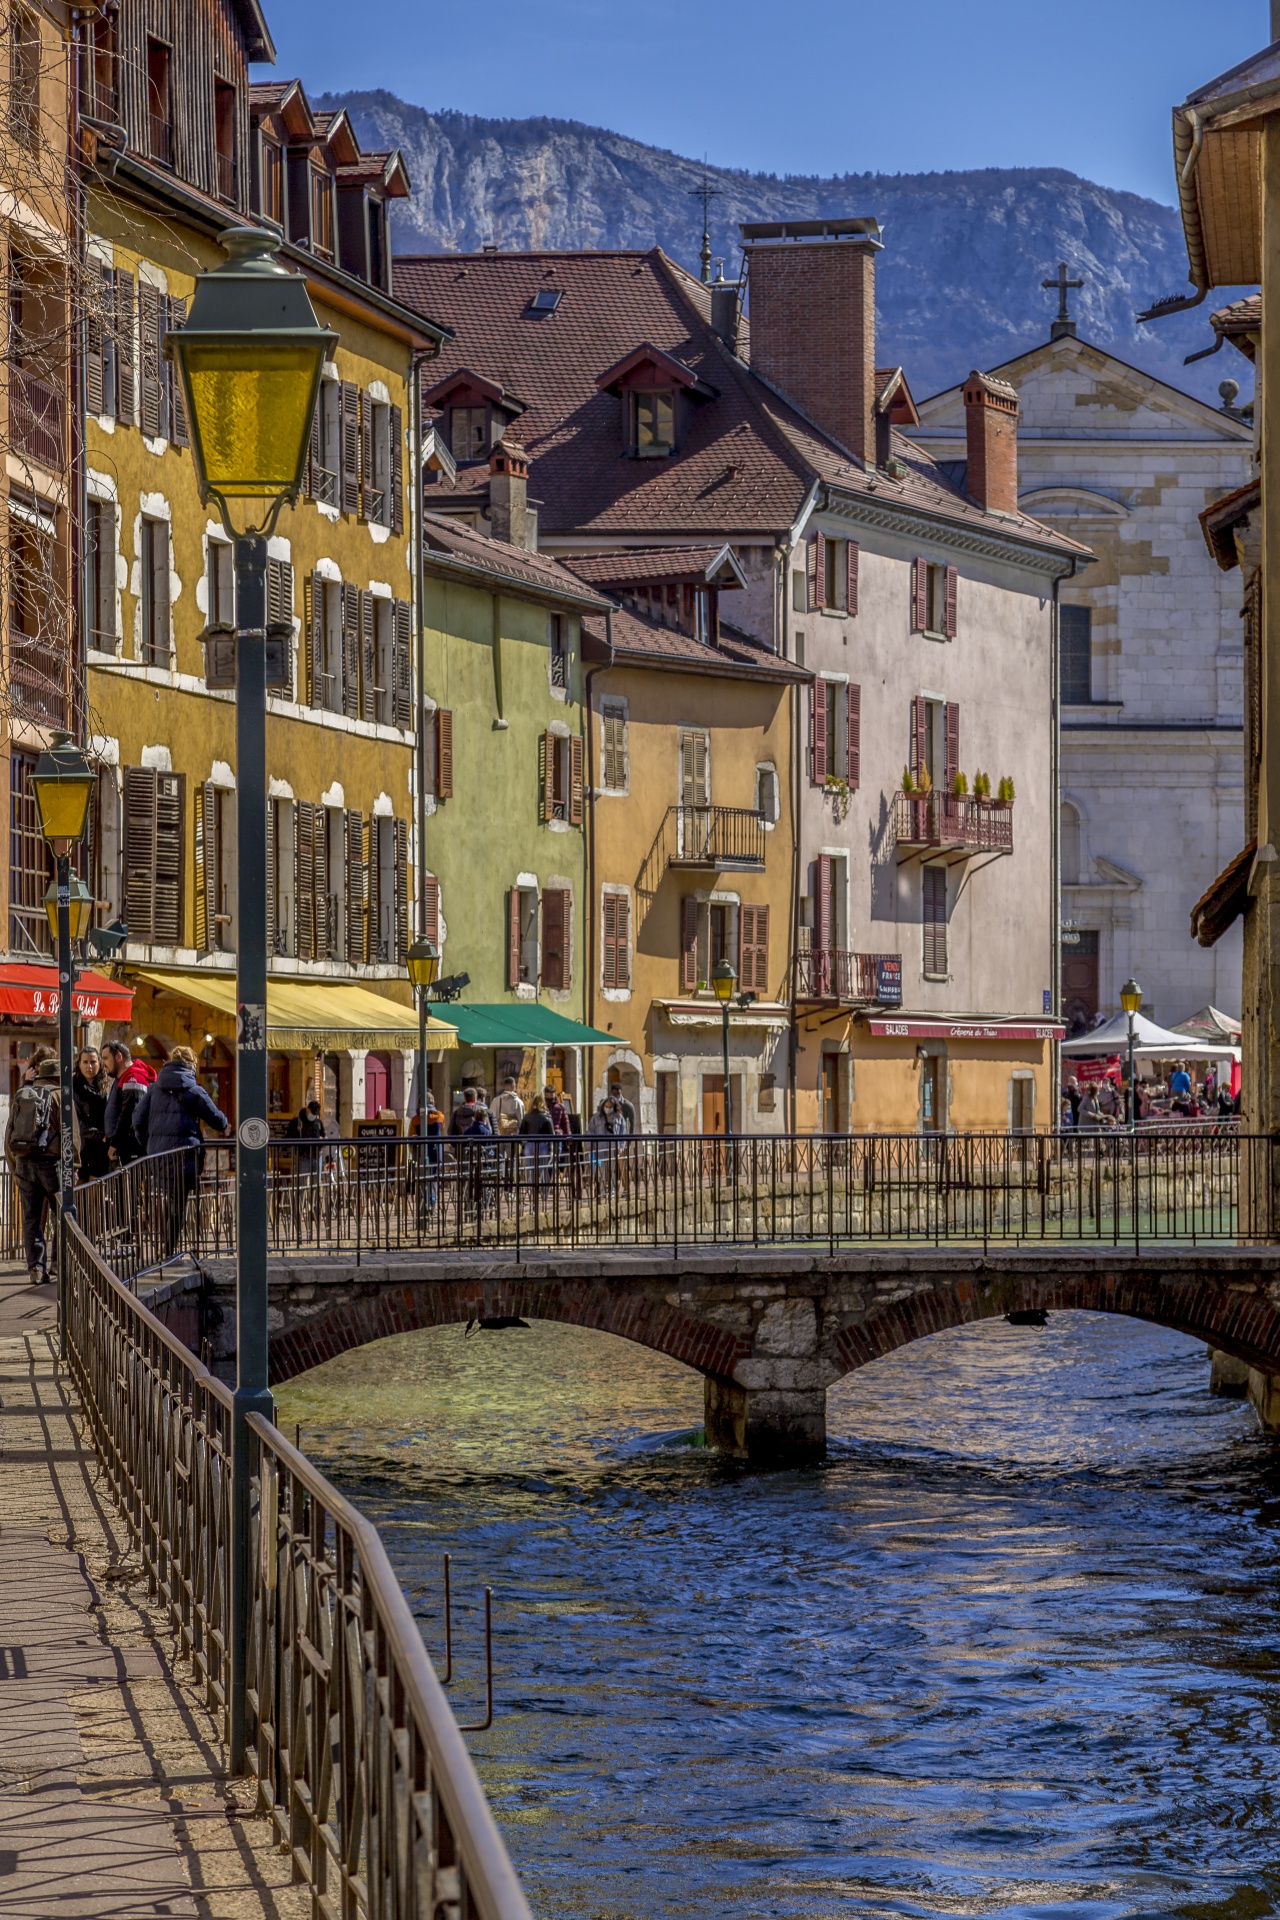 Annecy Old Town And Thiou River